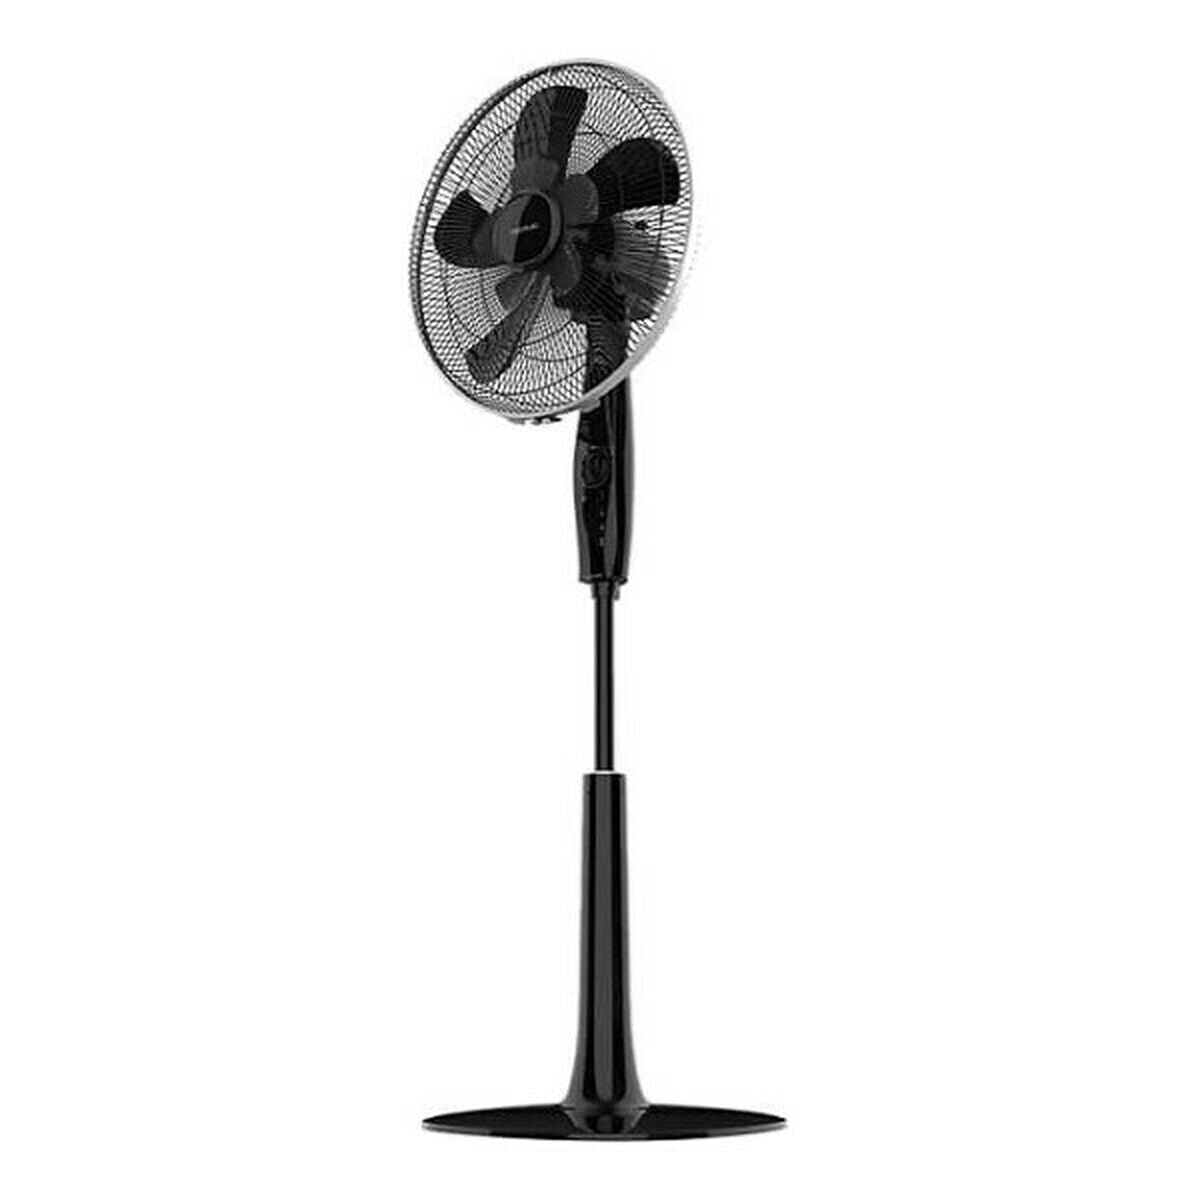 Freestanding Fan Cecotec EnergySilence 1020 Extreme Connected 60 W